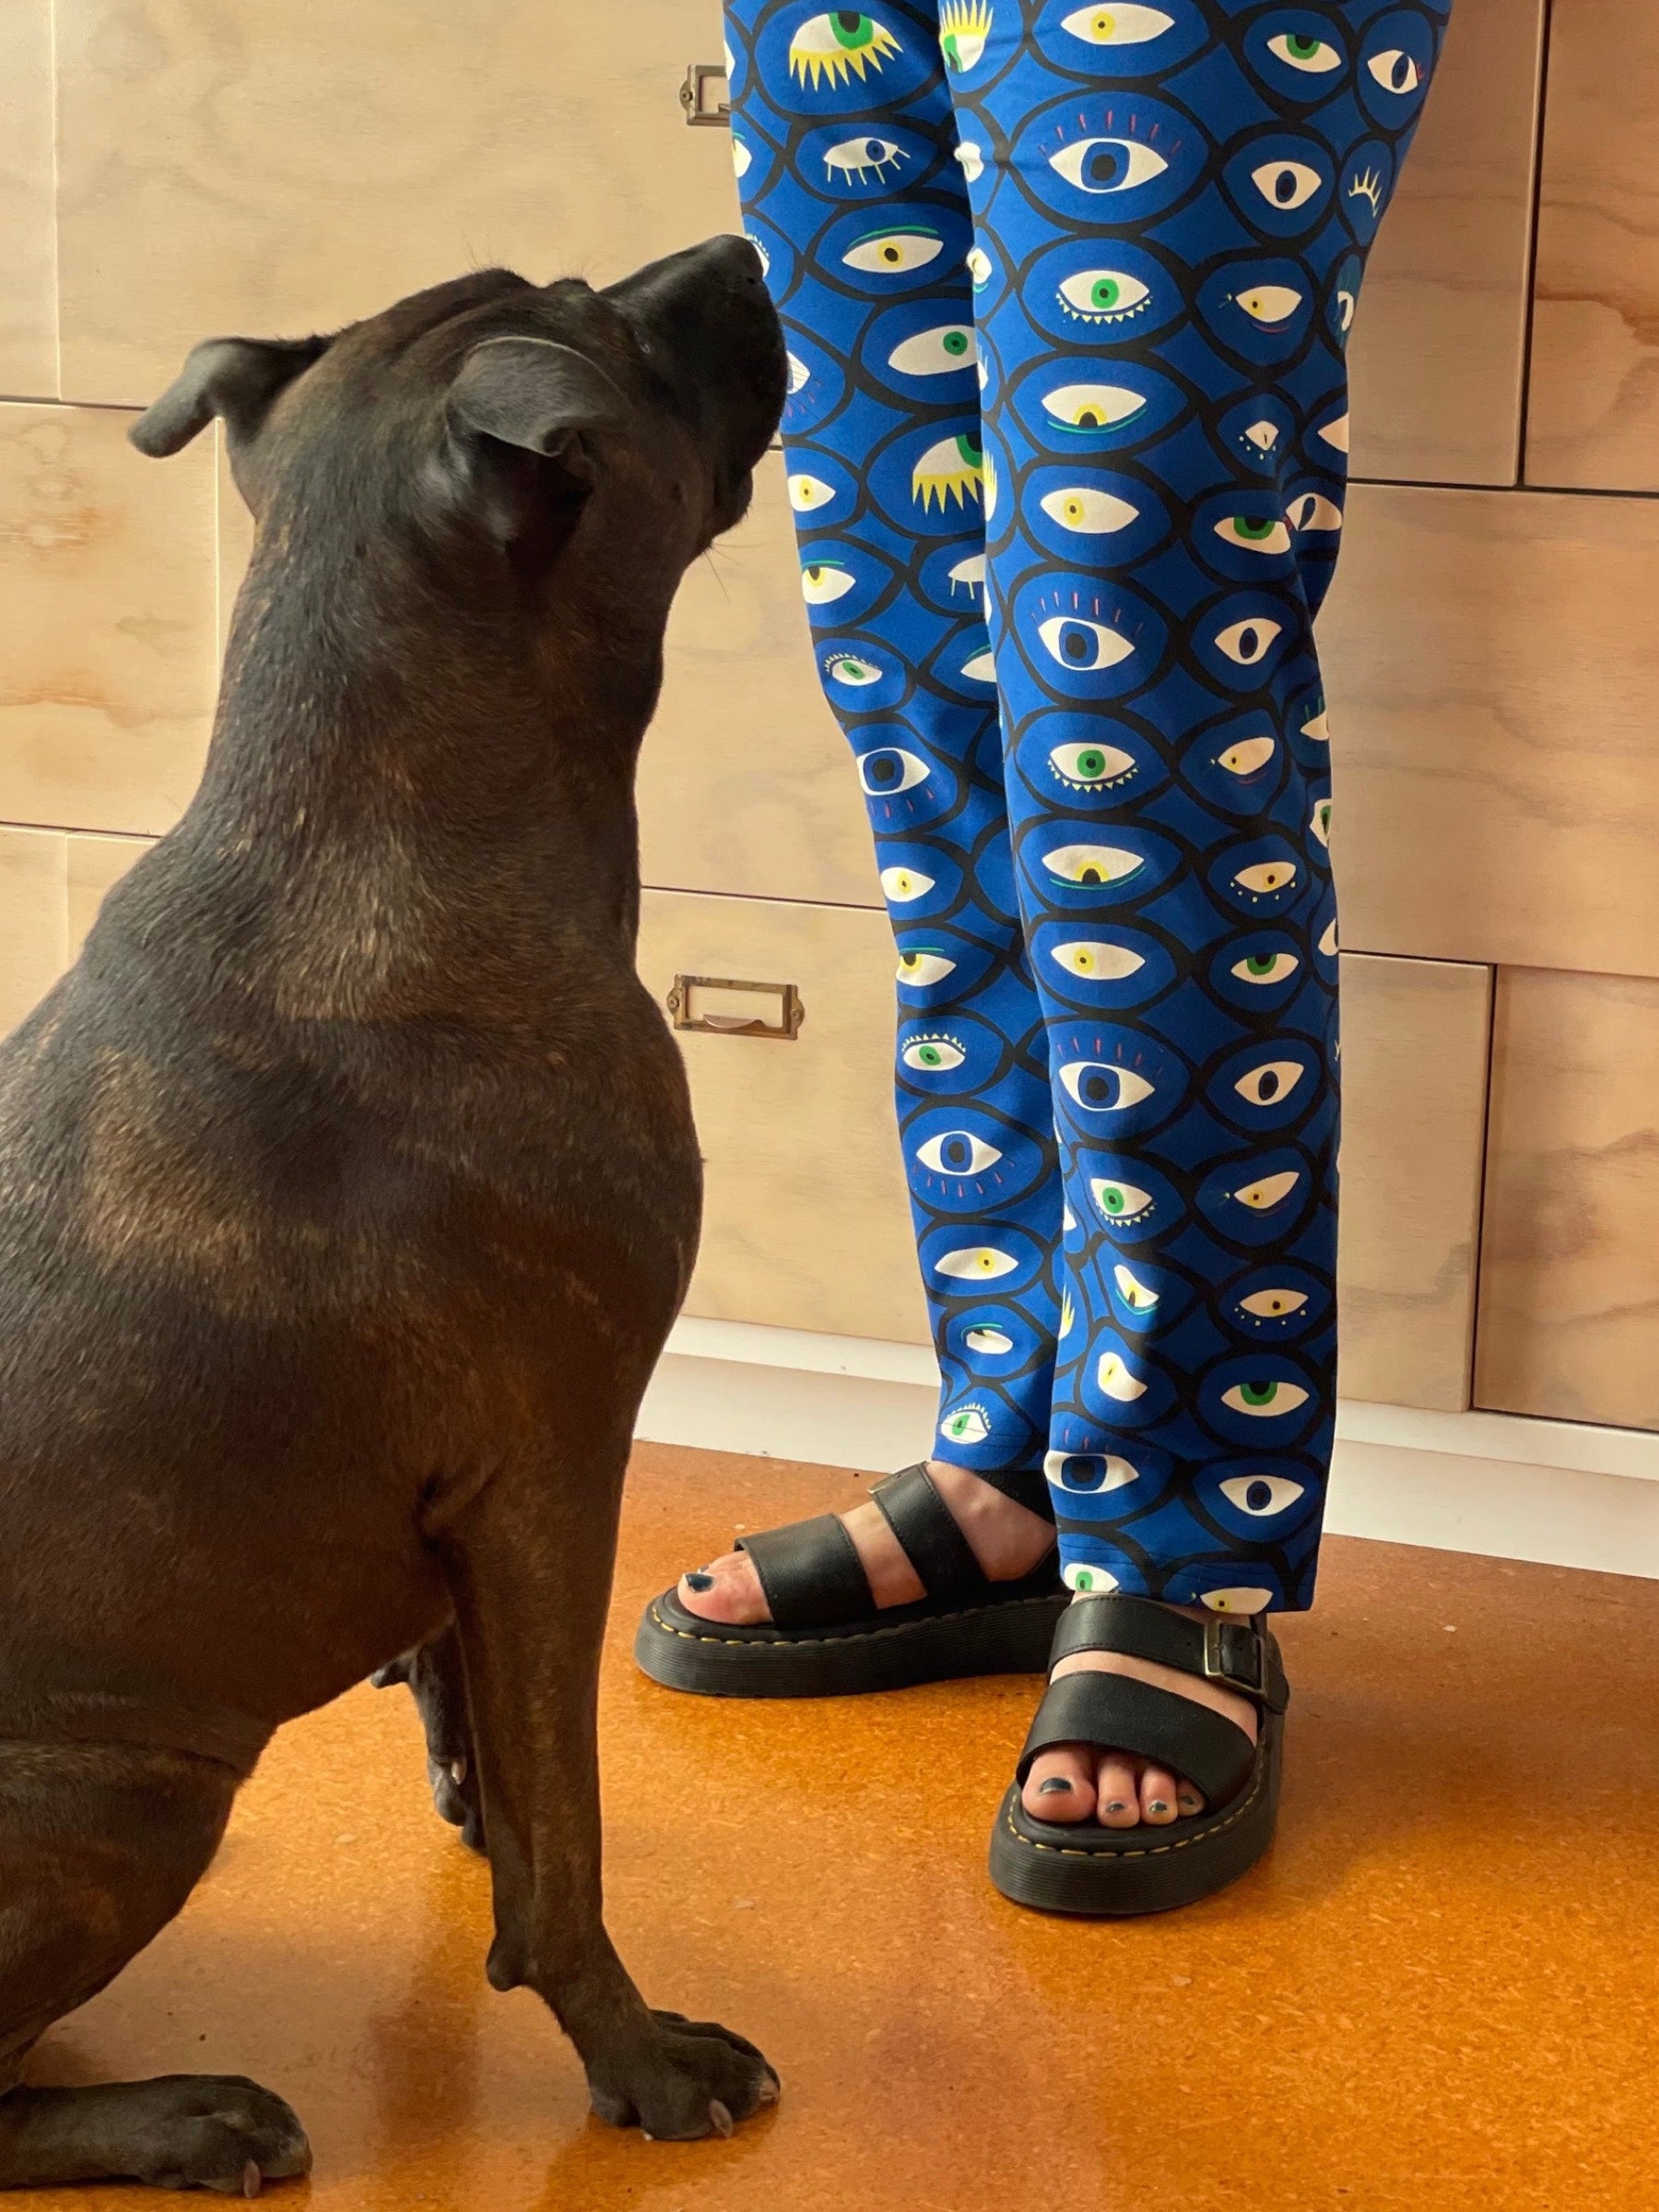 Straight Leg Pants on person standing with dog